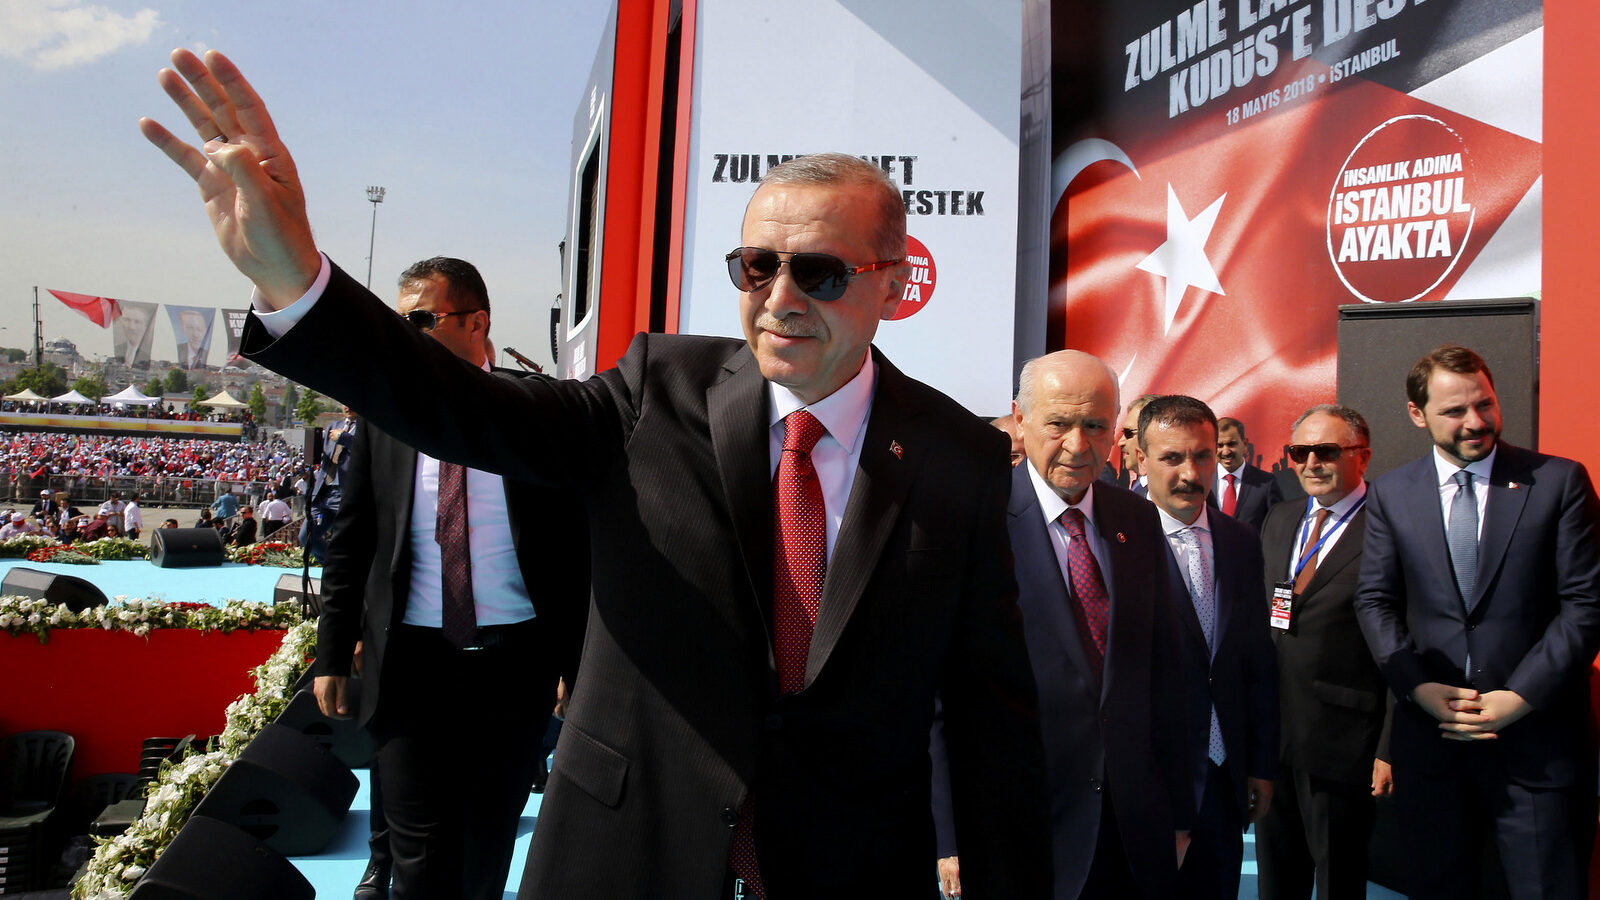 Turkish President Recep Tayyip Erdogan salutes a rally in solidarity with Palestinians in Istanbul, Turkey, May 18, 2018. Photo | Presidential Press Service